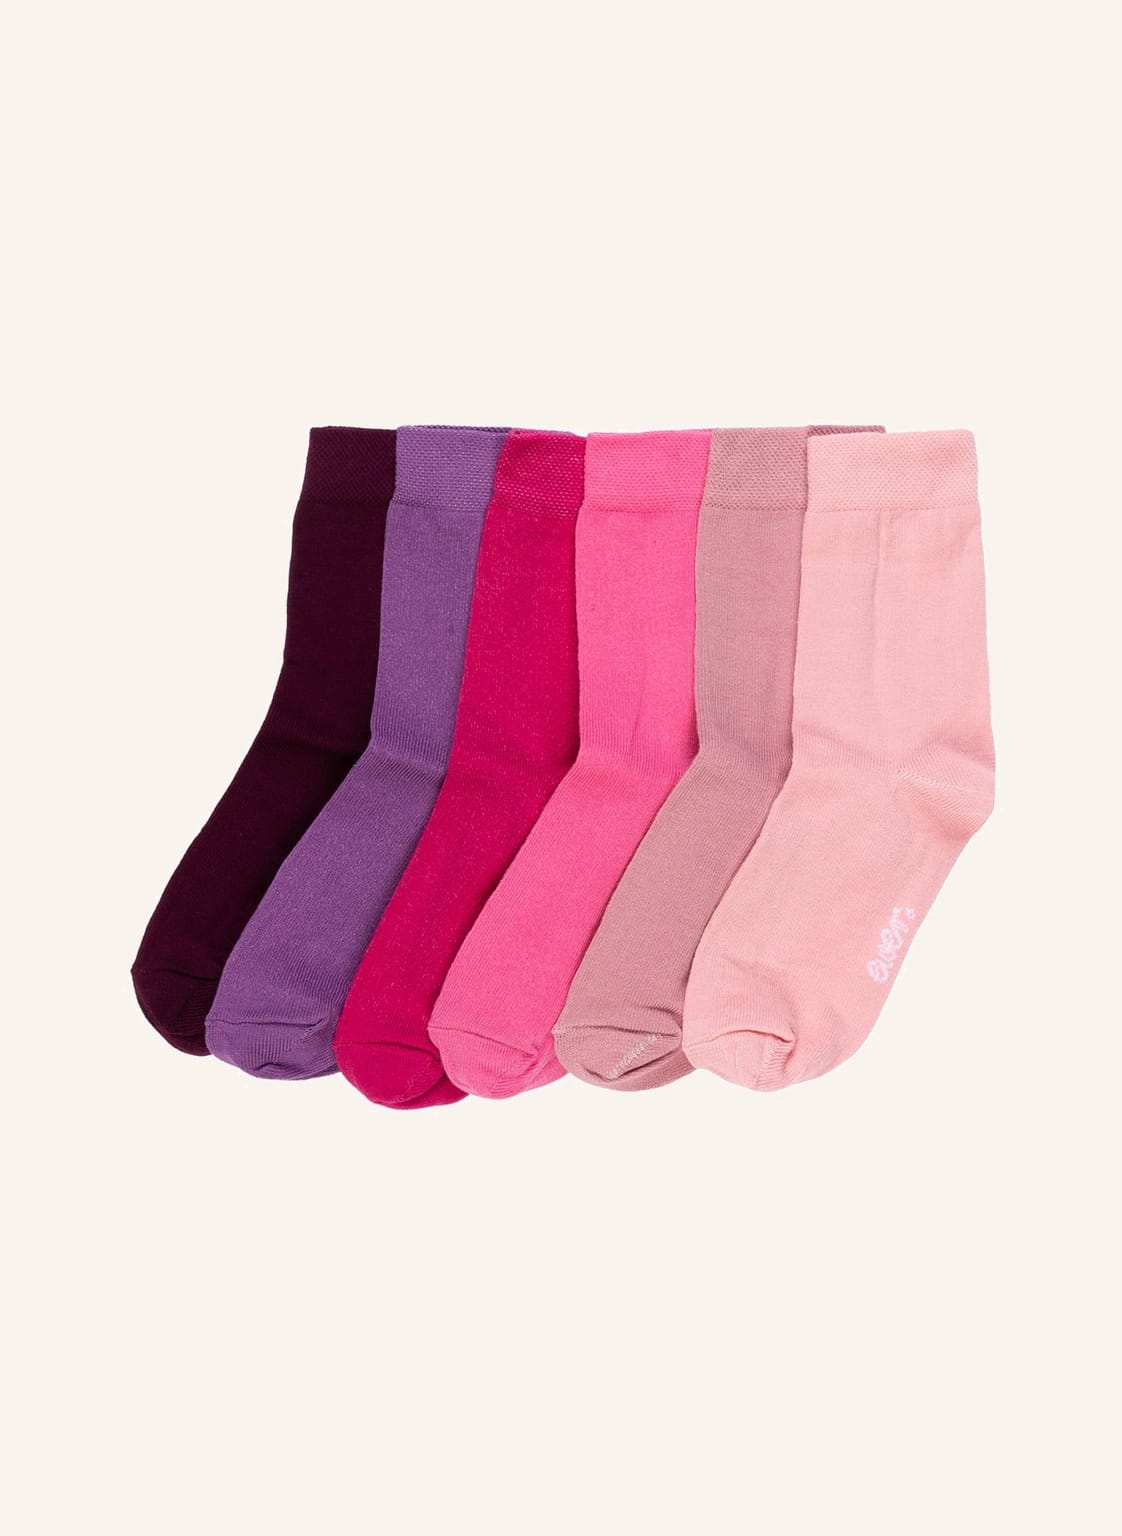 Ewers Collection 6er-Pack Socken lila von ewers COLLECTION